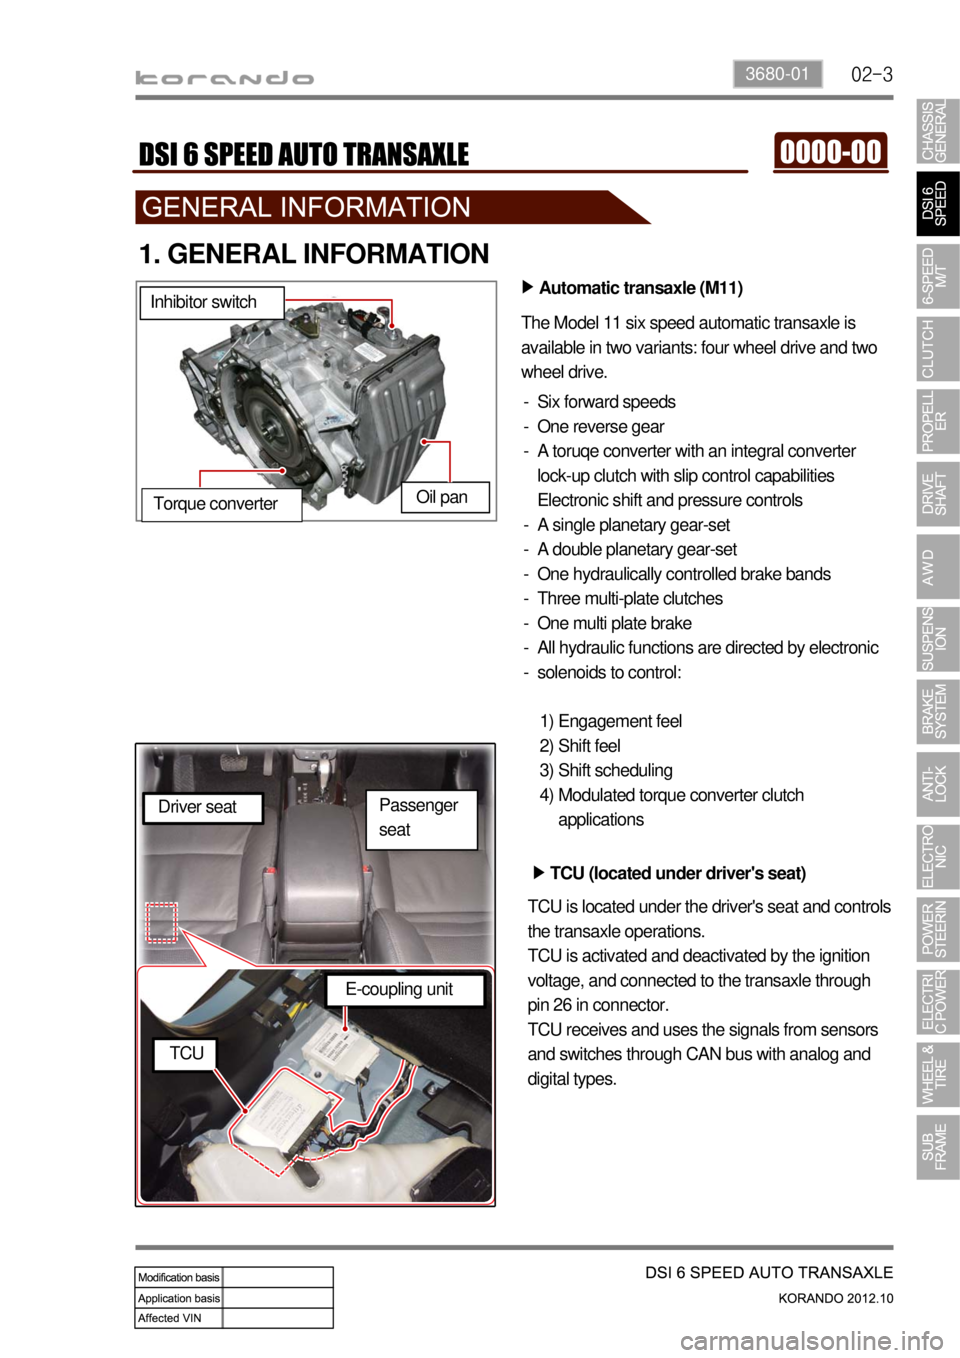 SSANGYONG KORANDO 2012  Service Manual 02-33680-01
1. GENERAL INFORMATION
Automatic transaxle (M11) ▶
The Model 11 six speed automatic transaxle is 
available in two variants: four wheel drive and two 
wheel drive.
Six forward speeds
One